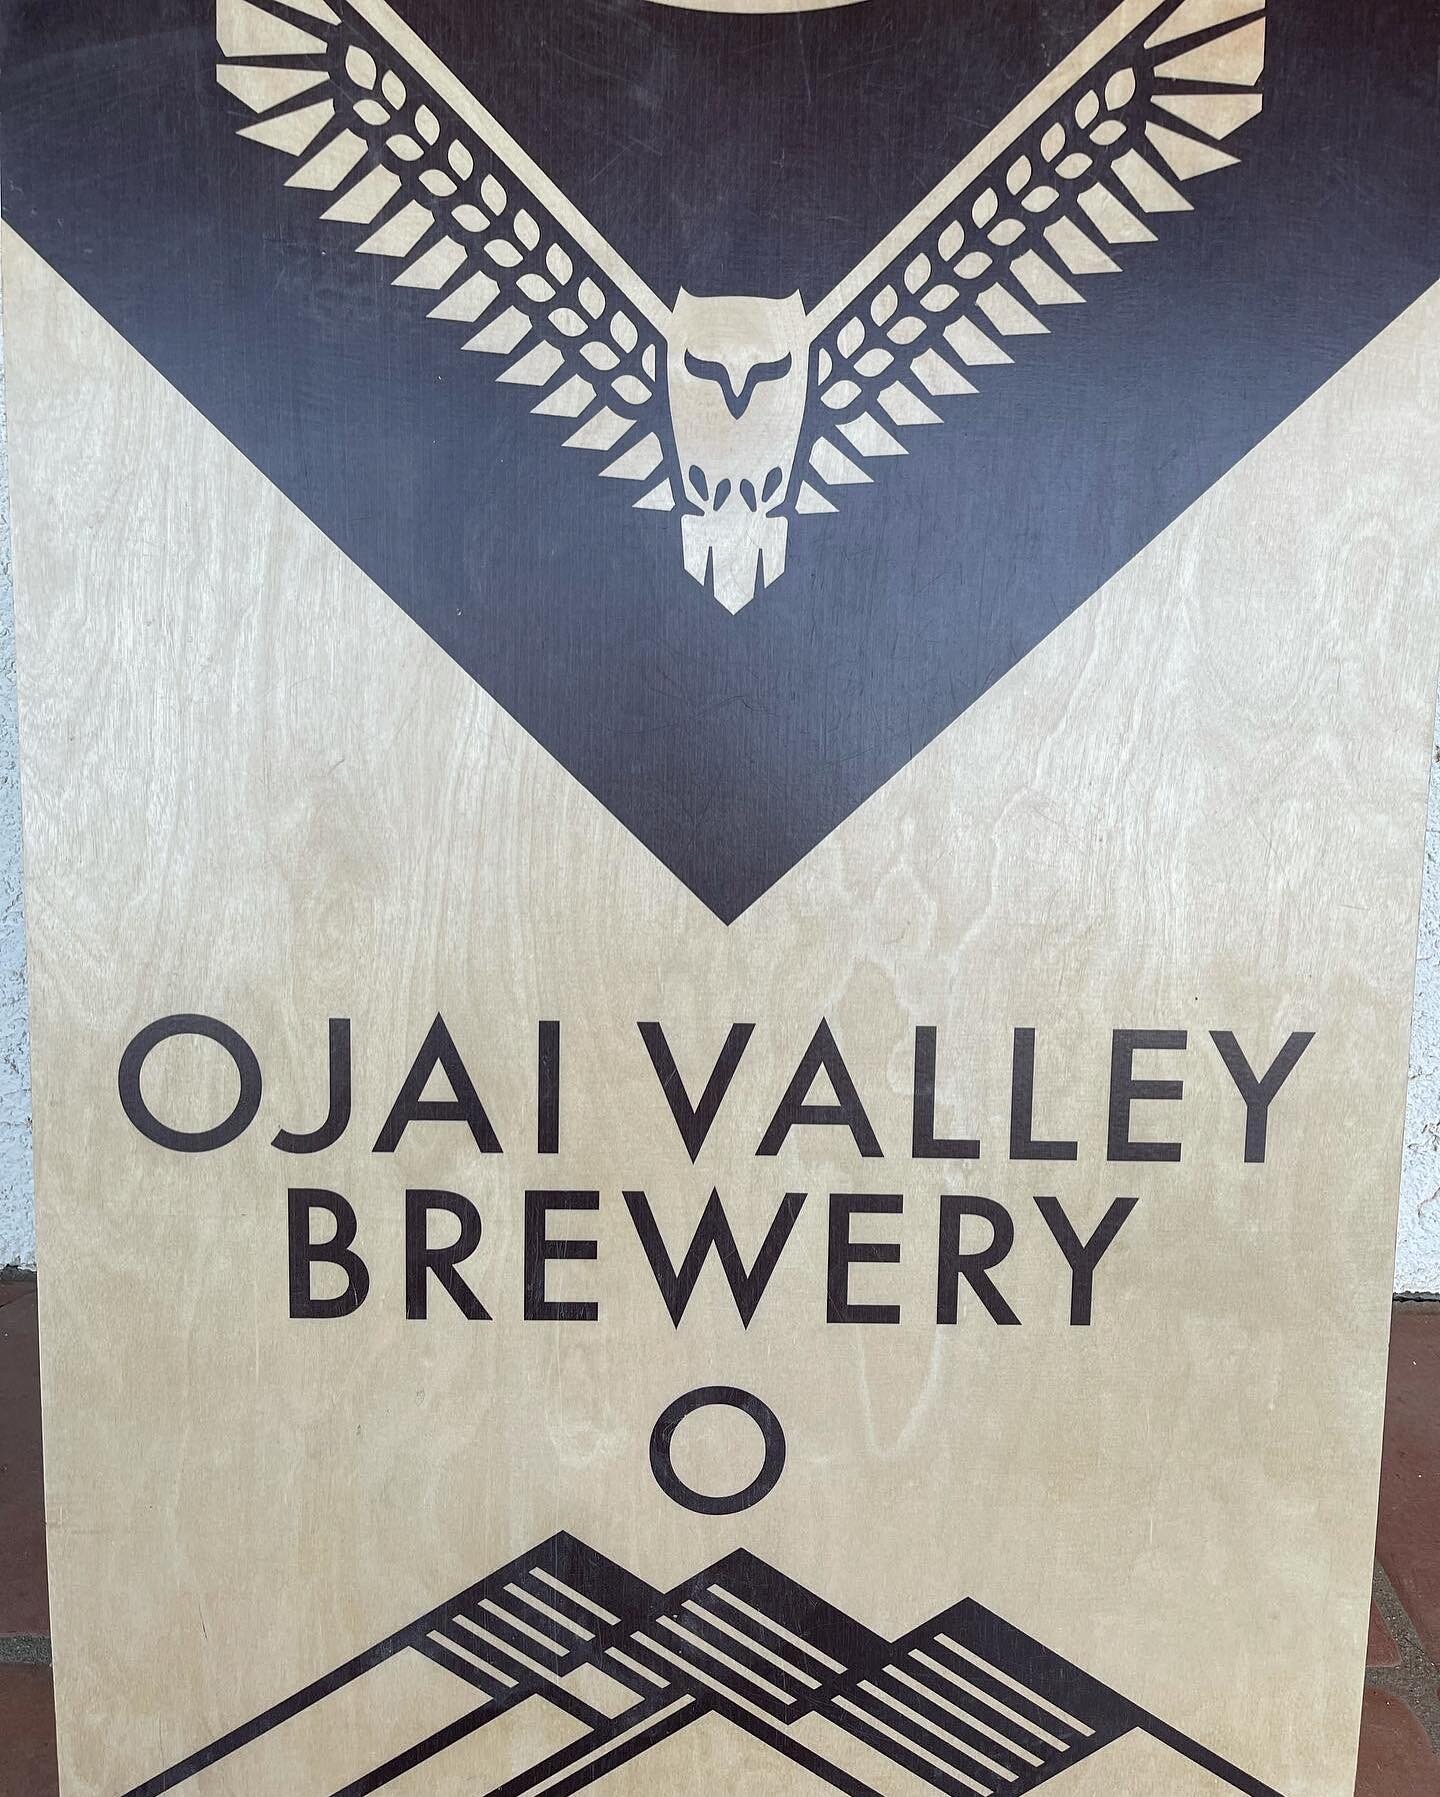 Setting up @ojai_valley_brewery this evening.